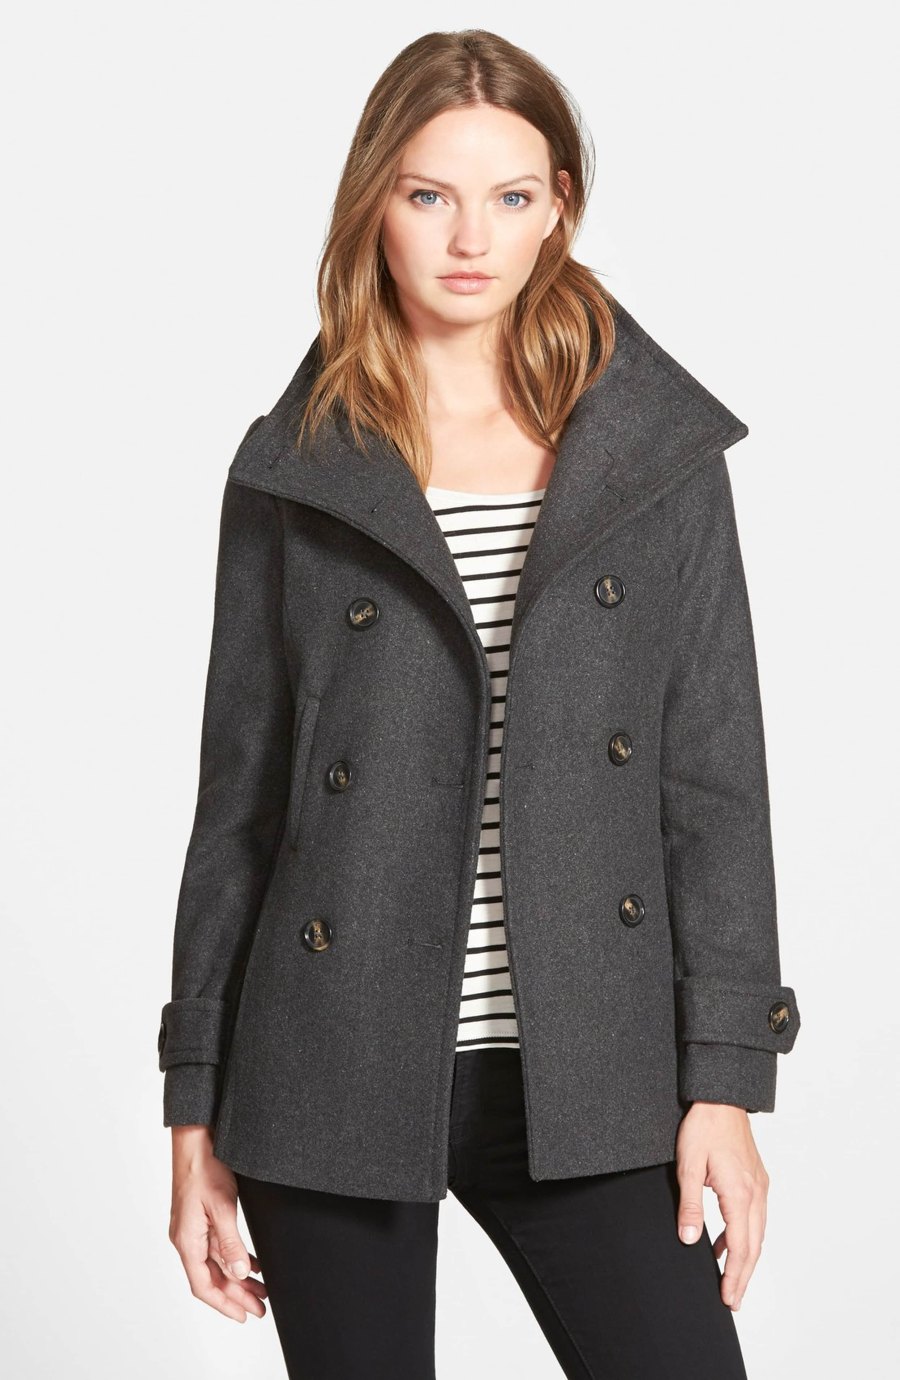 Shop This Top-Rated Peacoat for Under $40 at Nordstrom